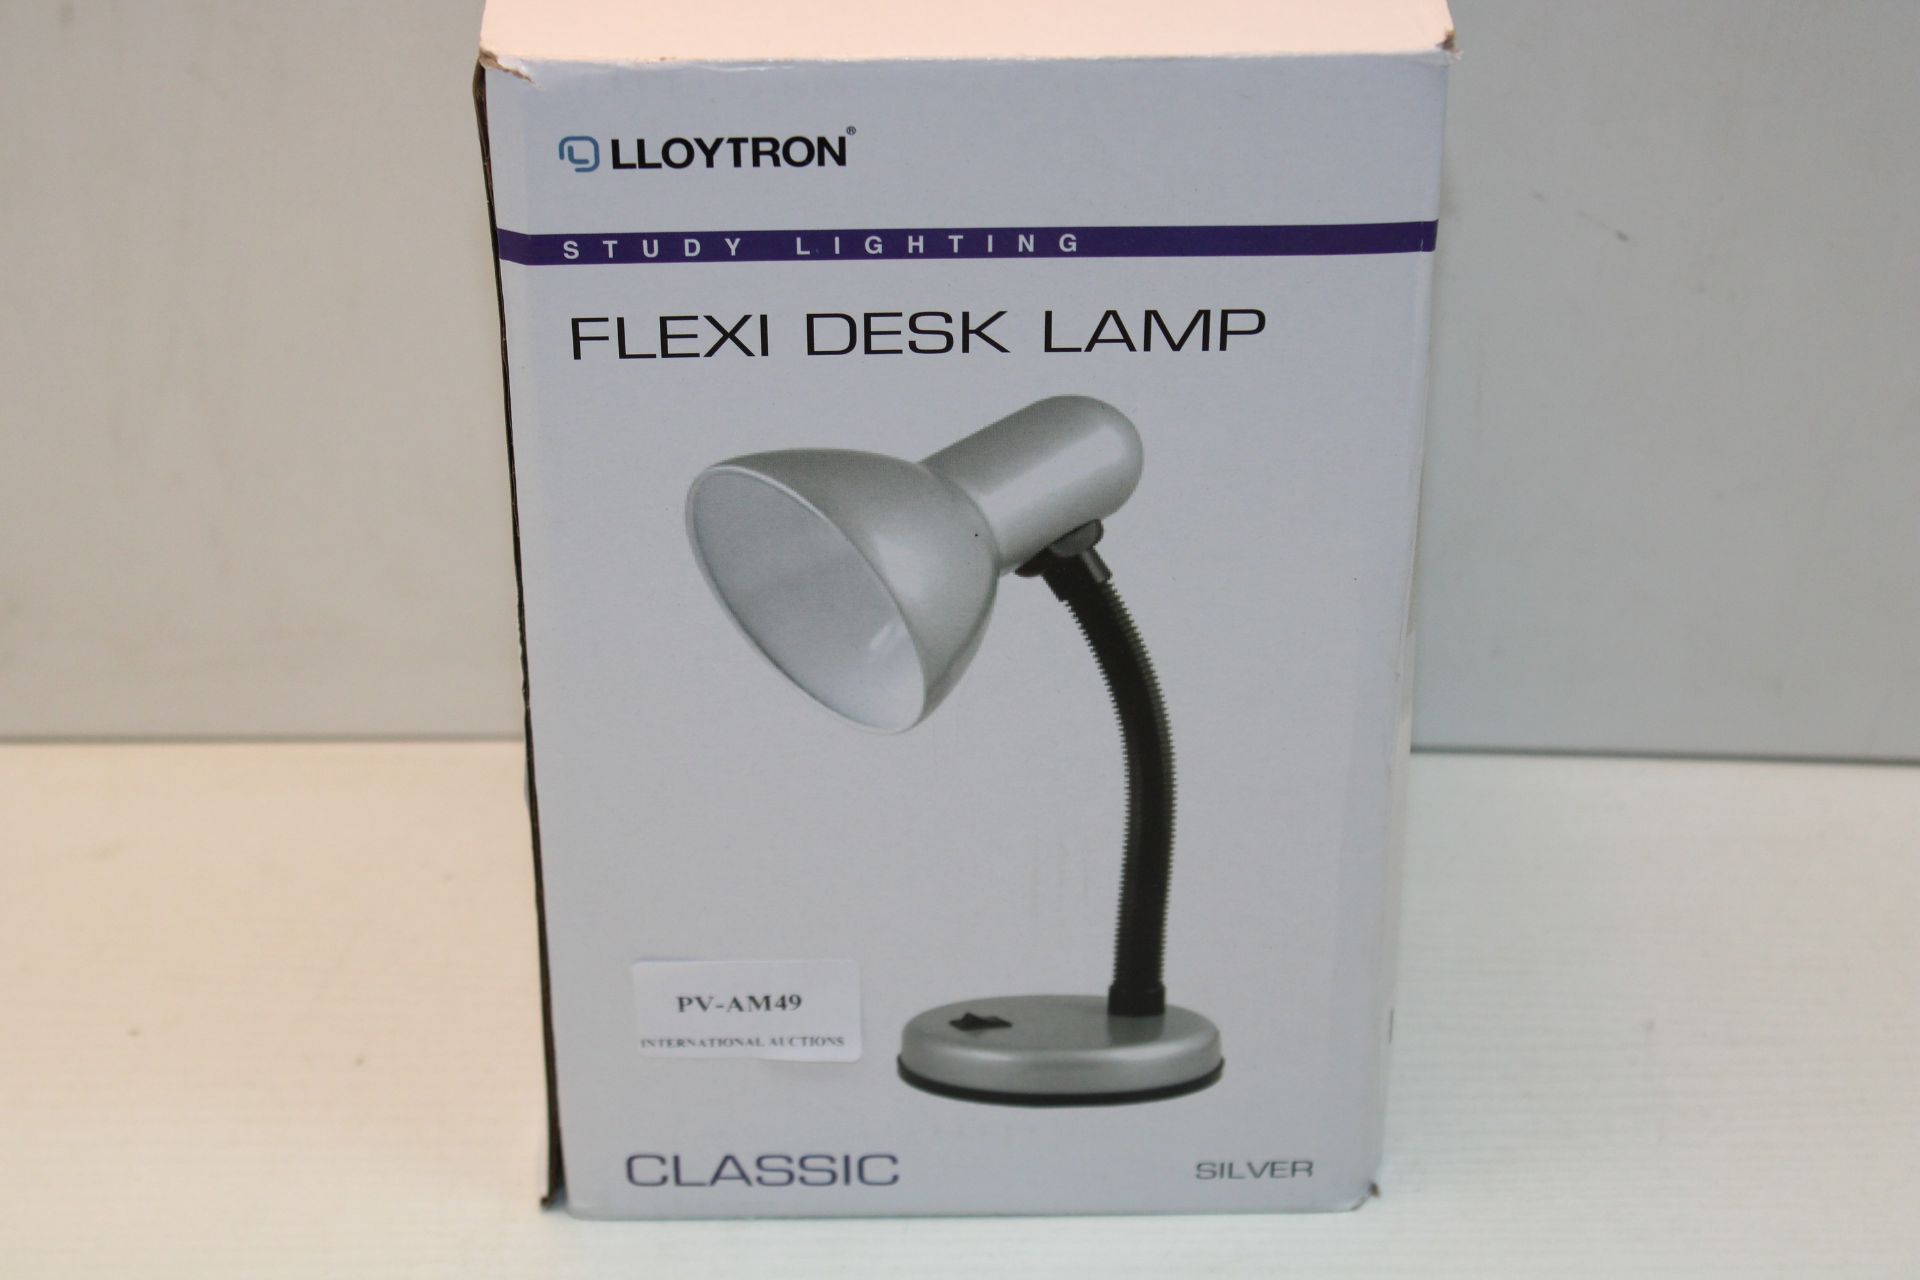 BOXED LLOYTRON STUDY LIGHTING FLEXI DESK LAMP RRP £12.99Condition ReportAppraisal Available on